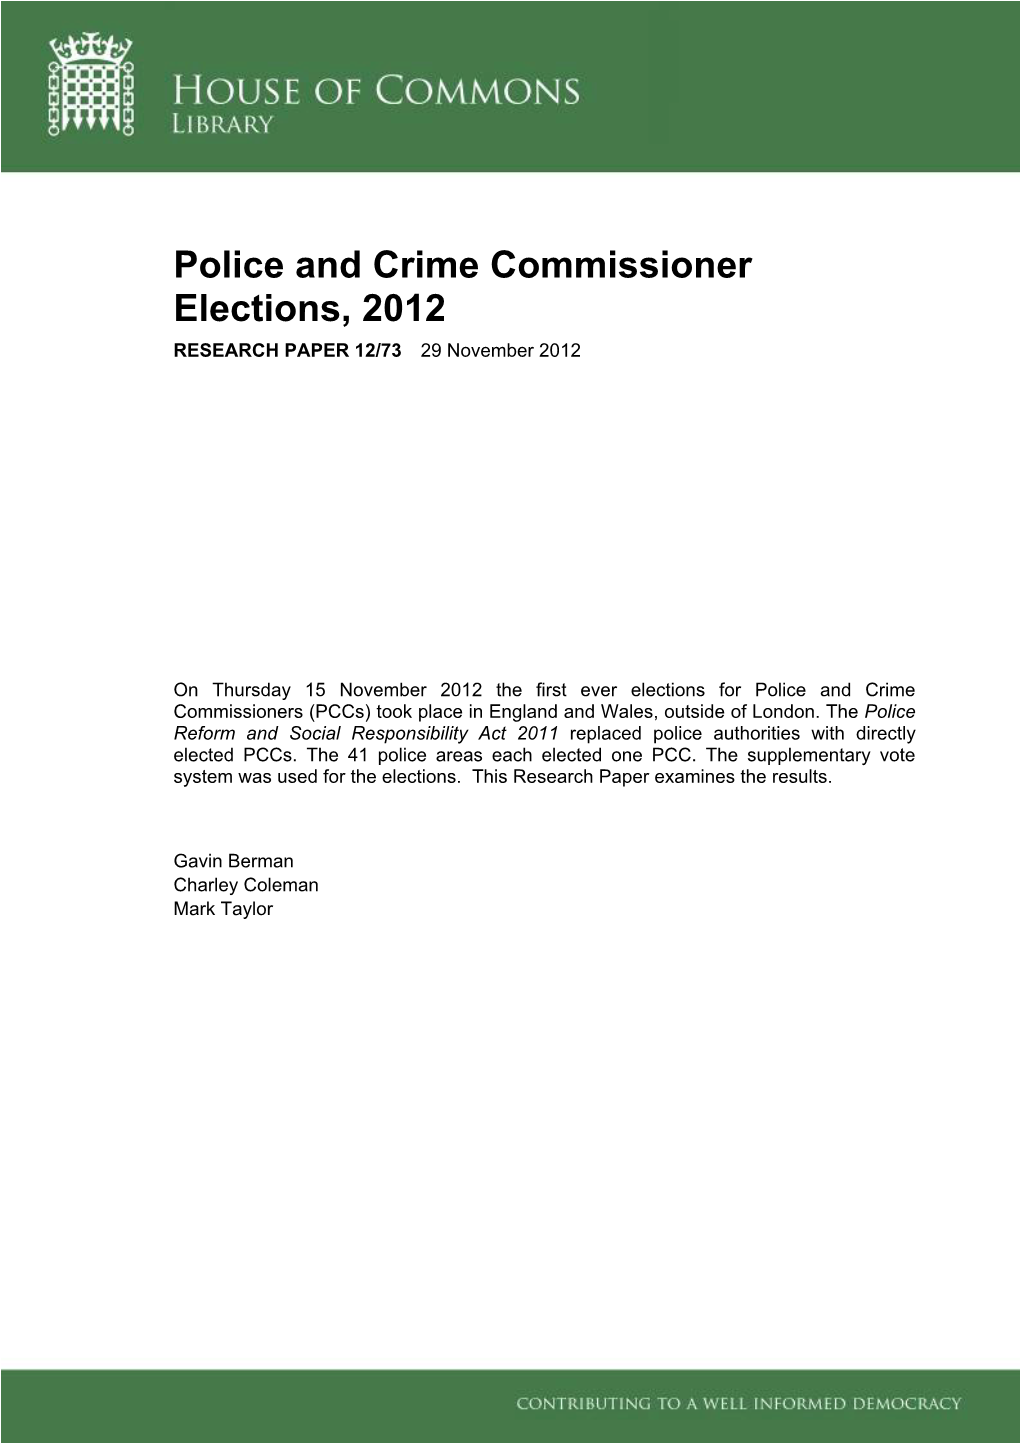 Police and Crime Commissioner Elections, 2012 RESEARCH PAPER 12/73 29 November 2012